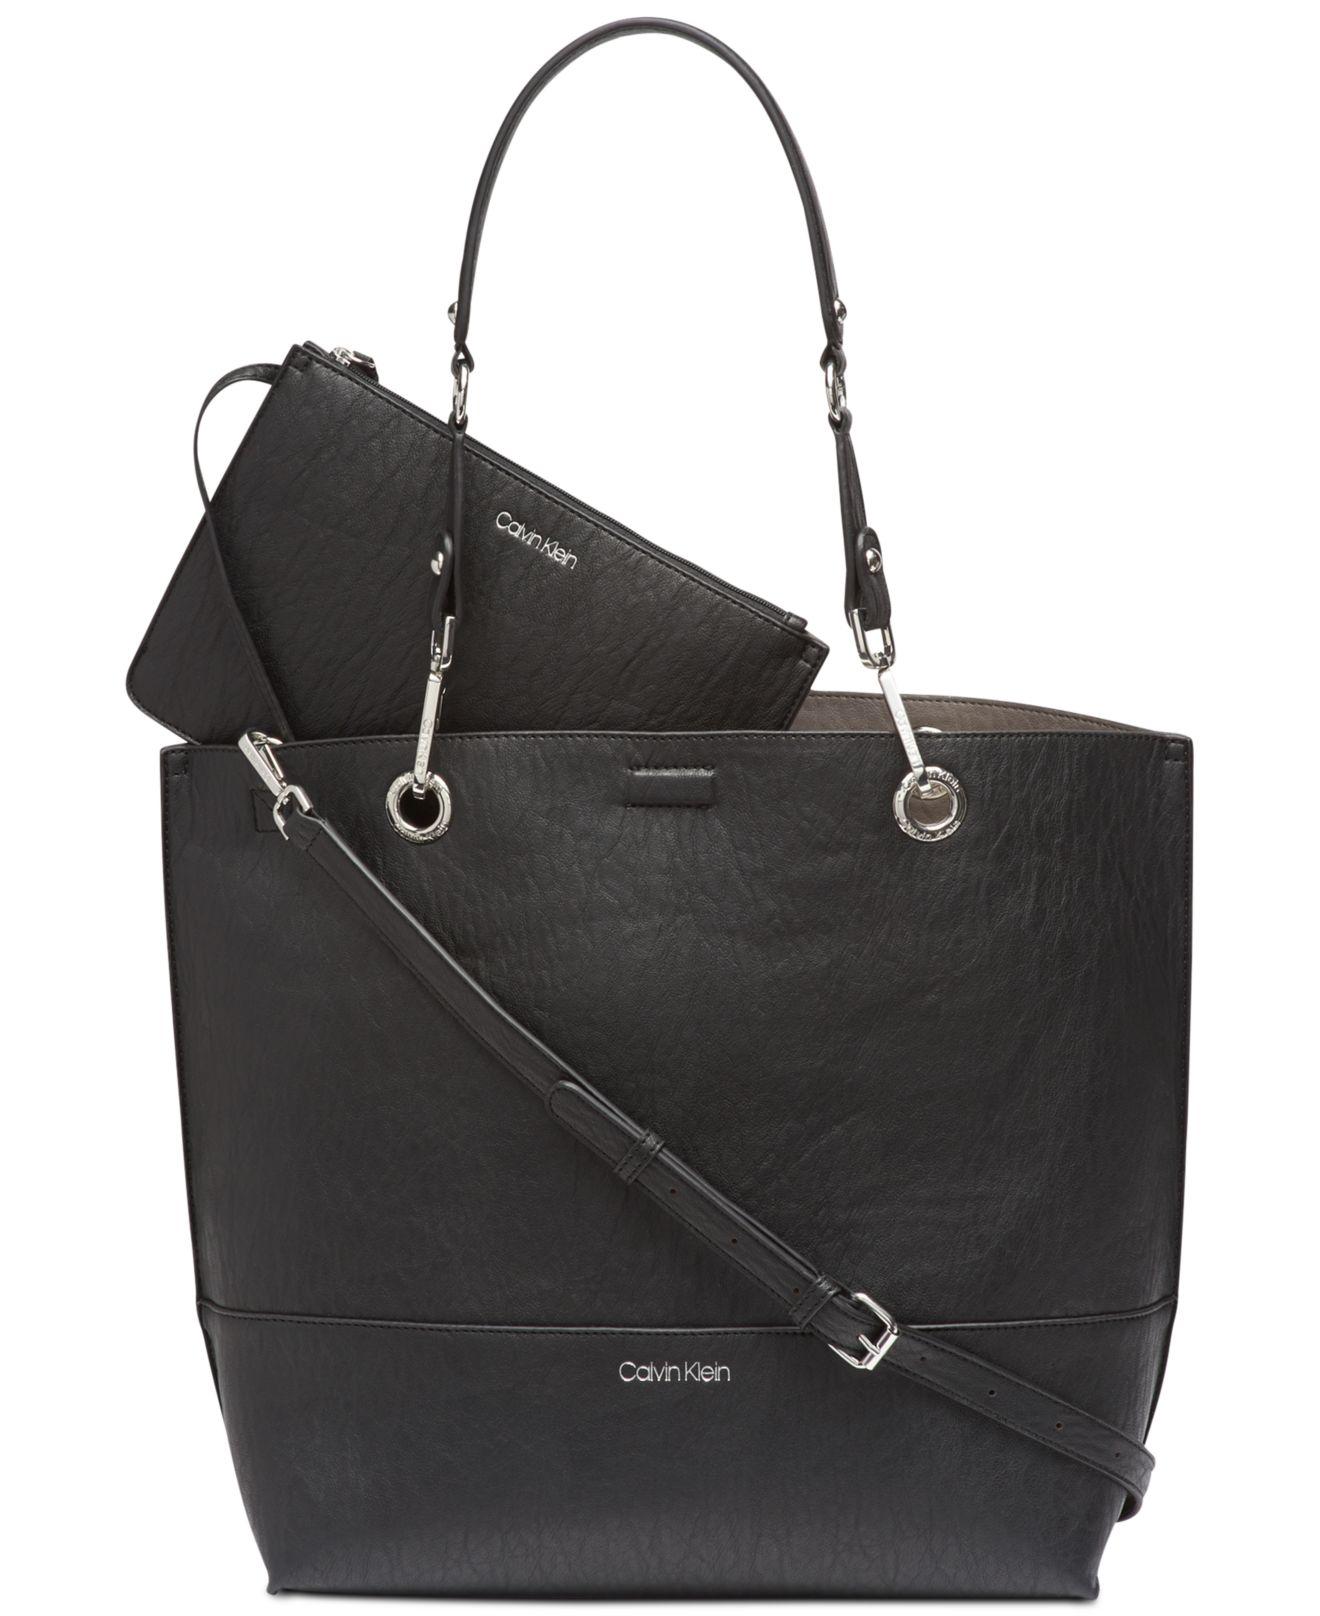 Calvin Klein Sonoma Reversible Tote With Pouch in Black/Silver (Black) |  Lyst